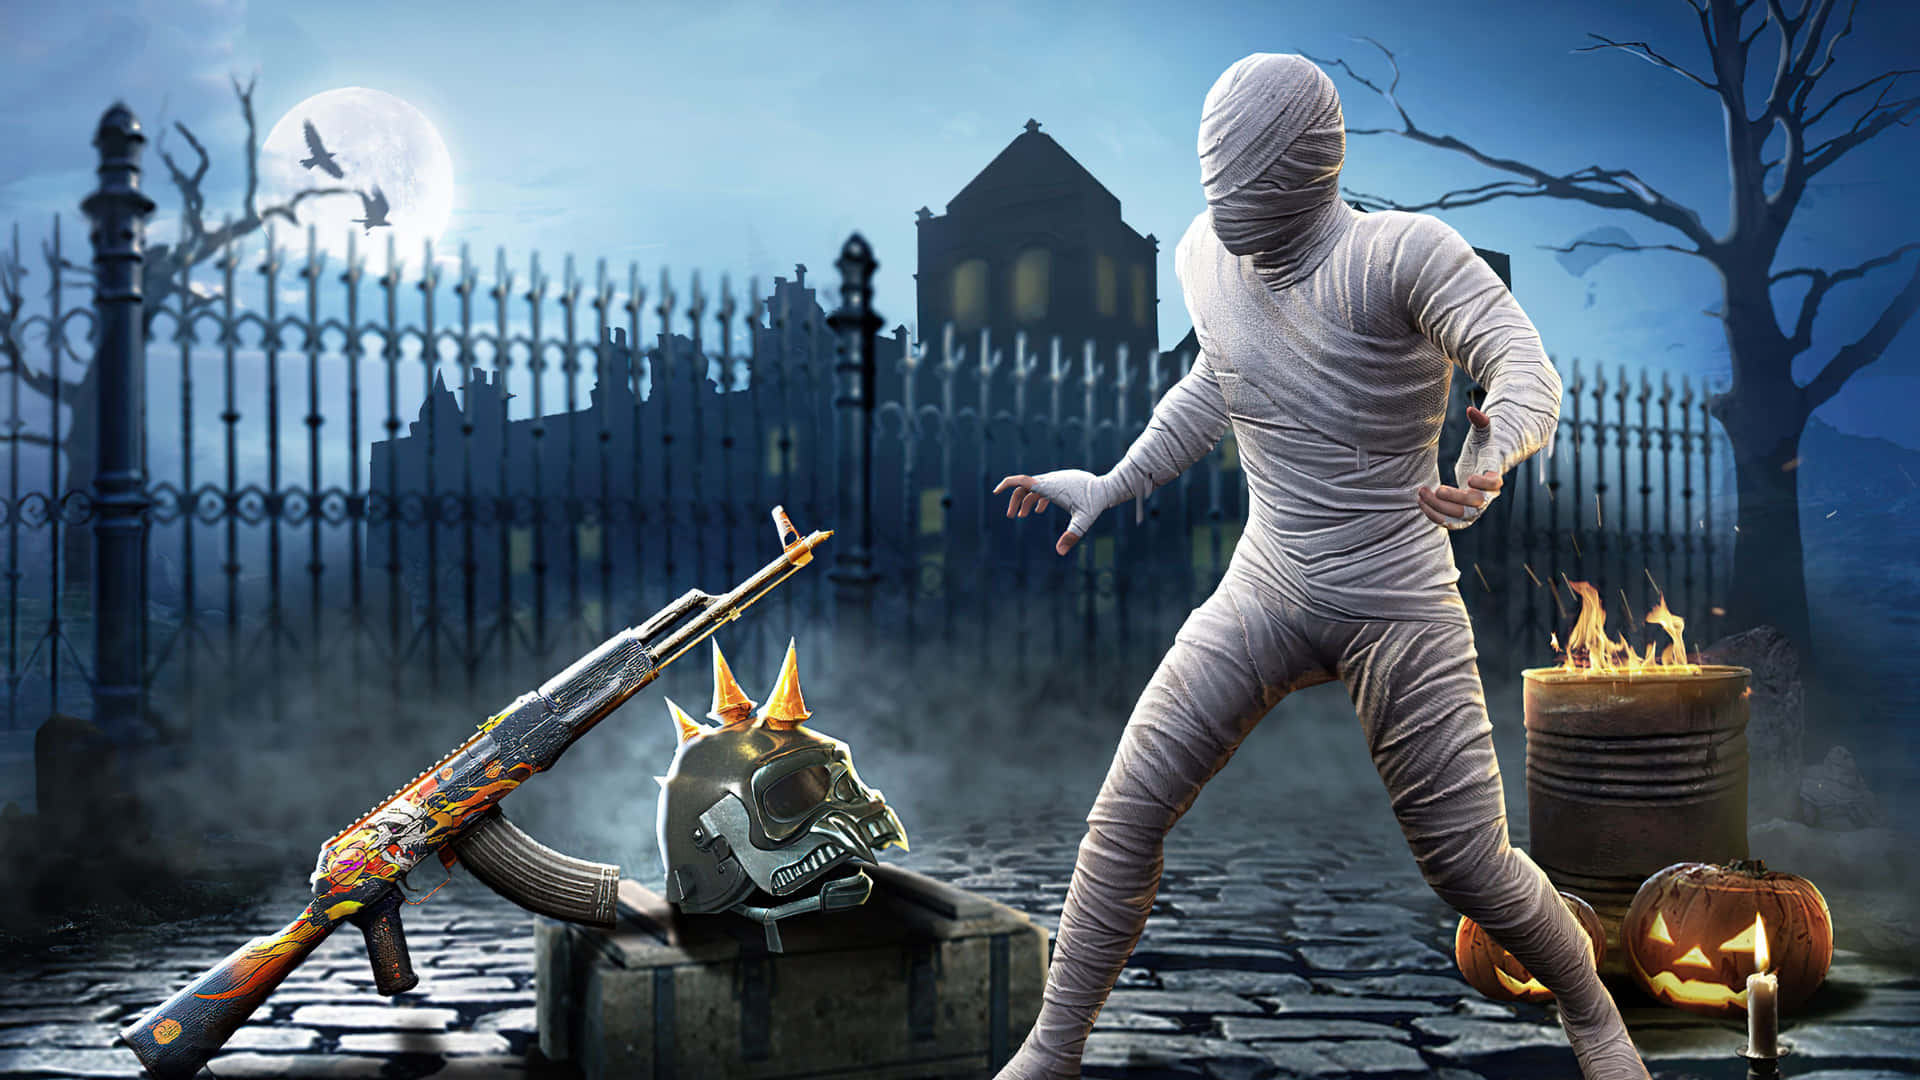 Ready for Halloween? Get in the spooky spirit with this Mummy Costume! Wallpaper